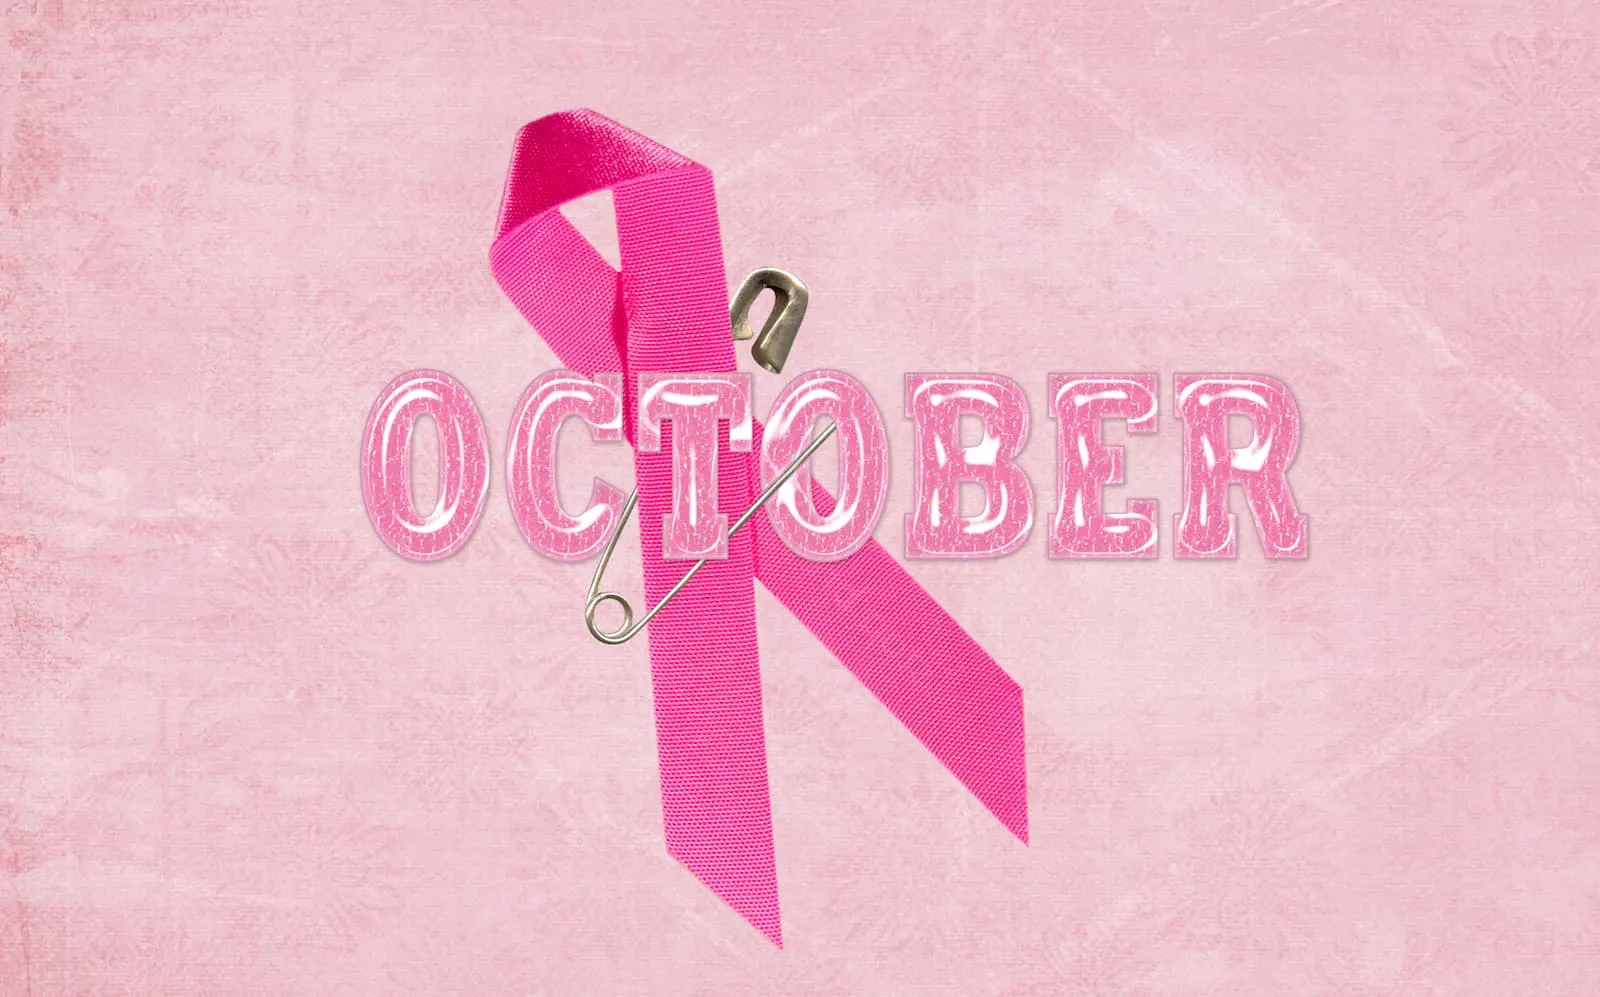 Breast cancer awareness image graphic.